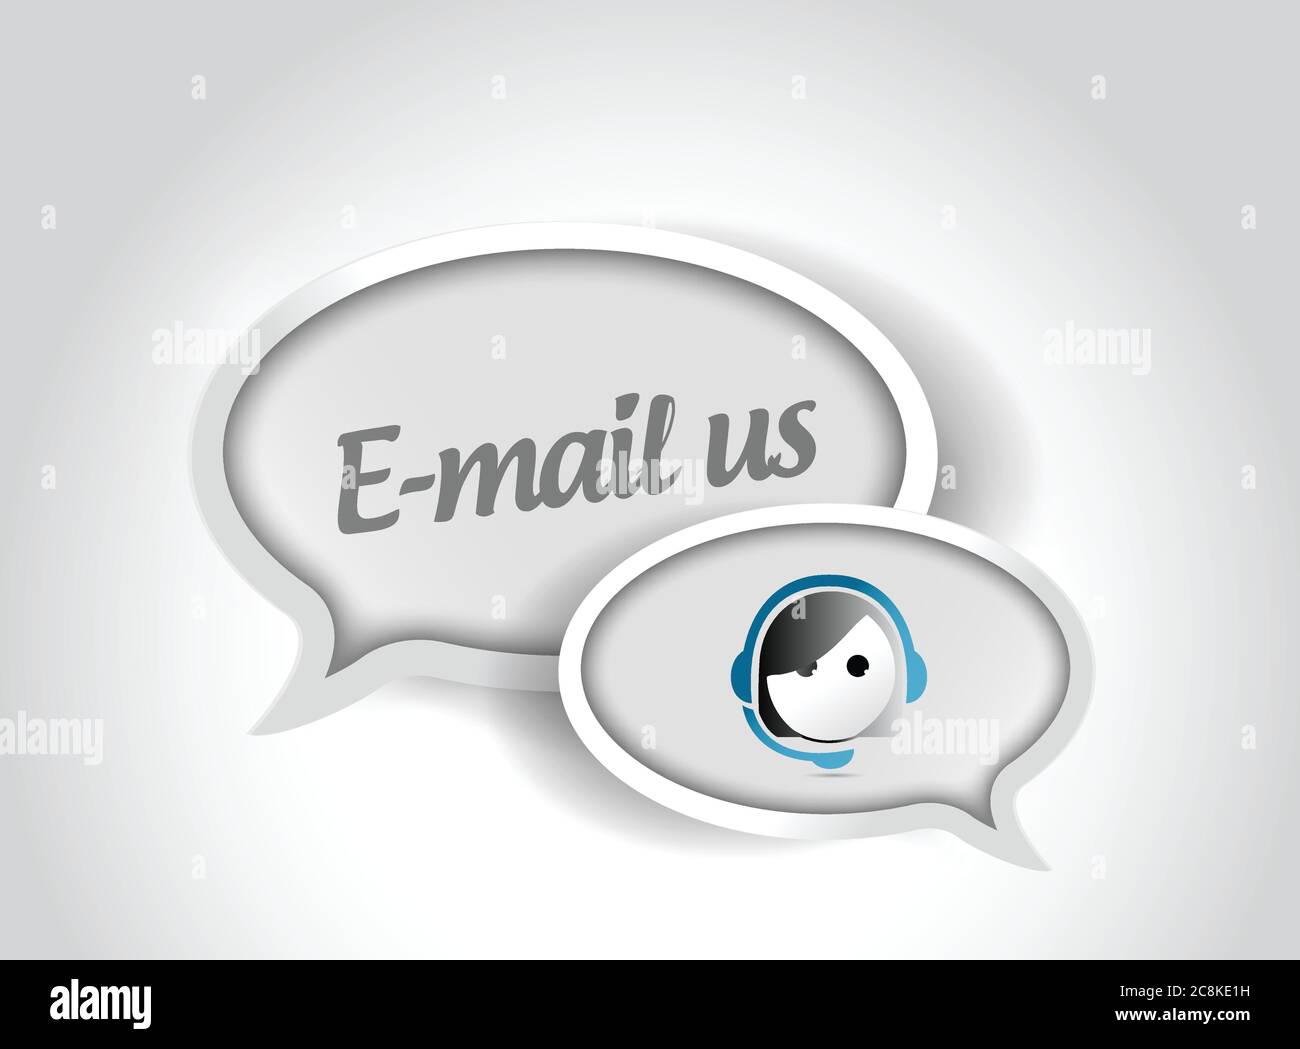 Email us message and customer support illustration design over a white background Stock Vector